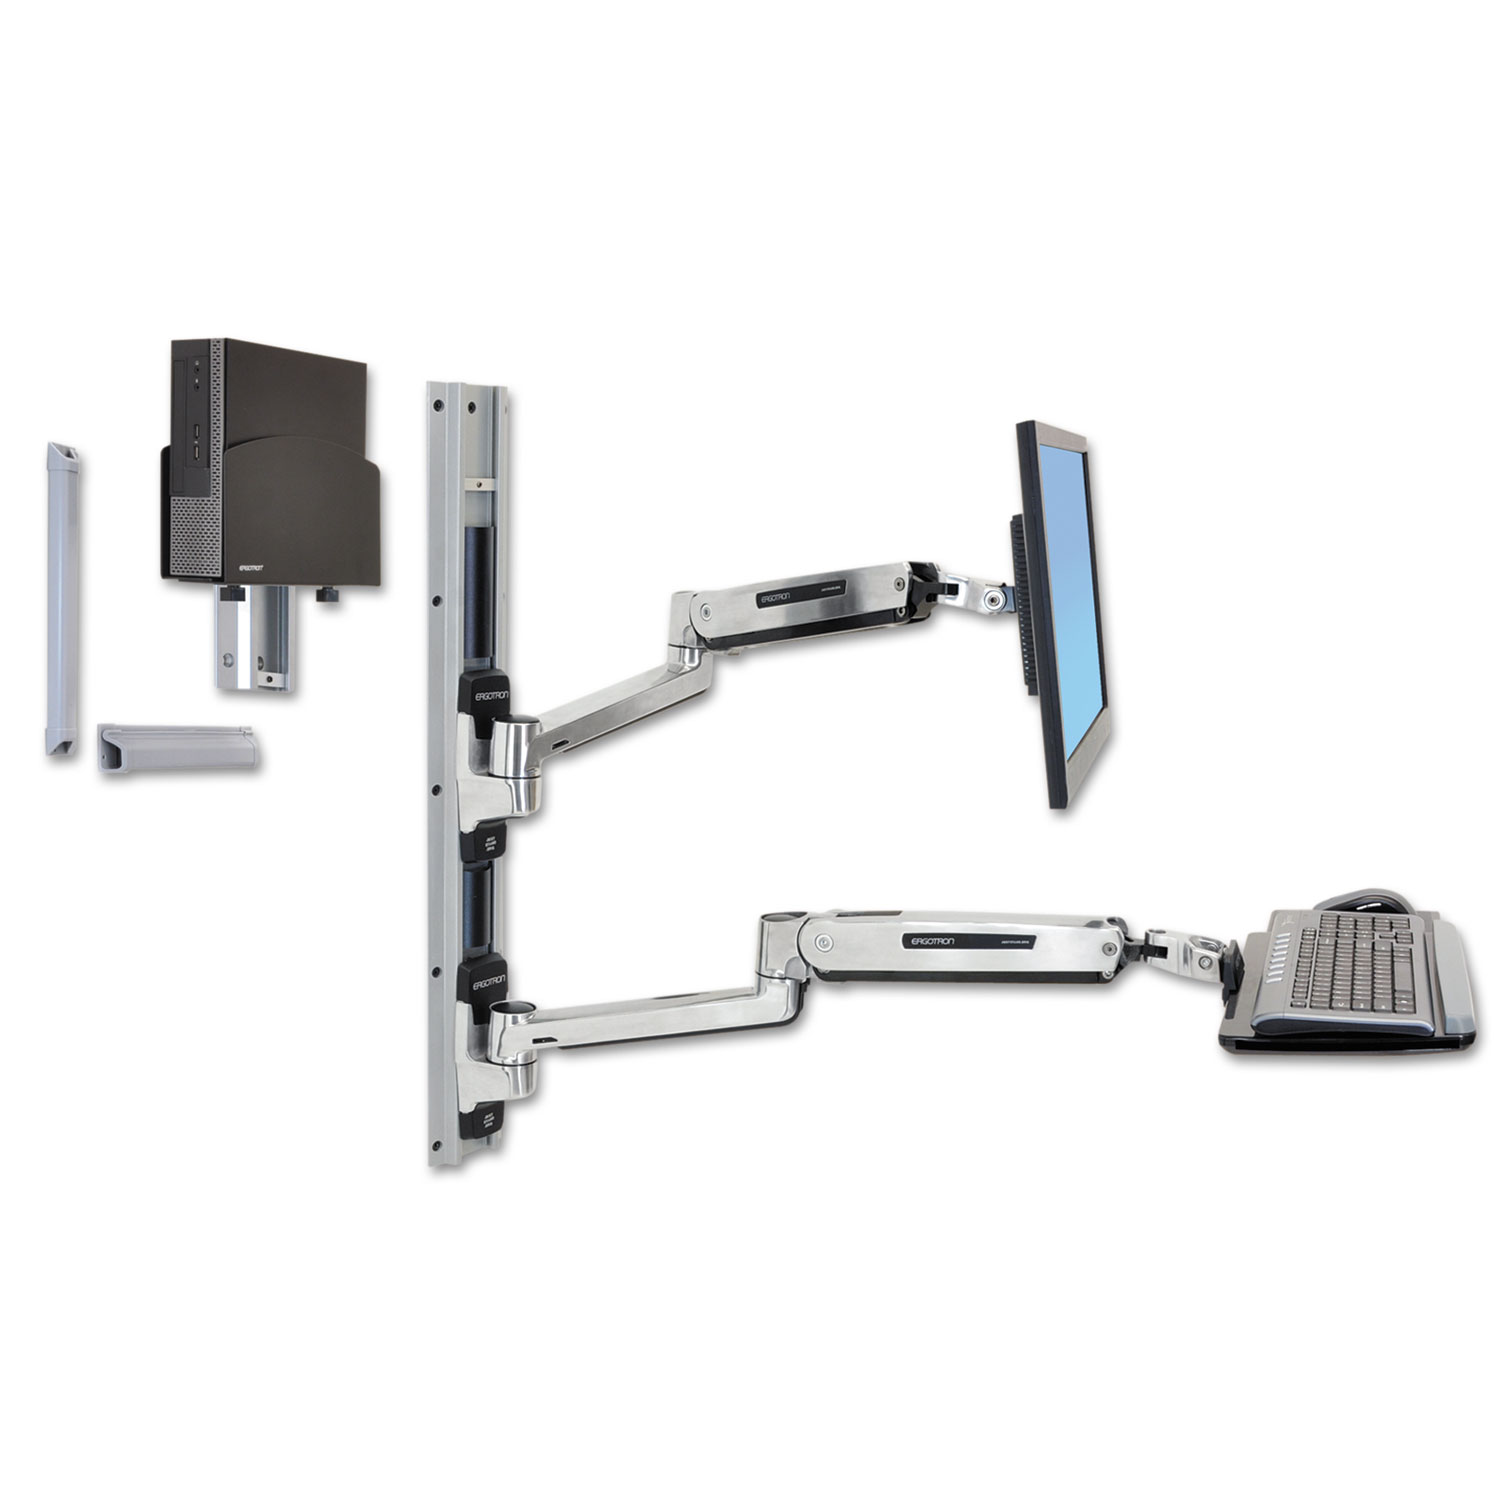  Ergotron 45-359-026 LX Sit-Stand Wall Mount System, Small CPU Holder, Polished Aluminum/Black (ERG45359026) 